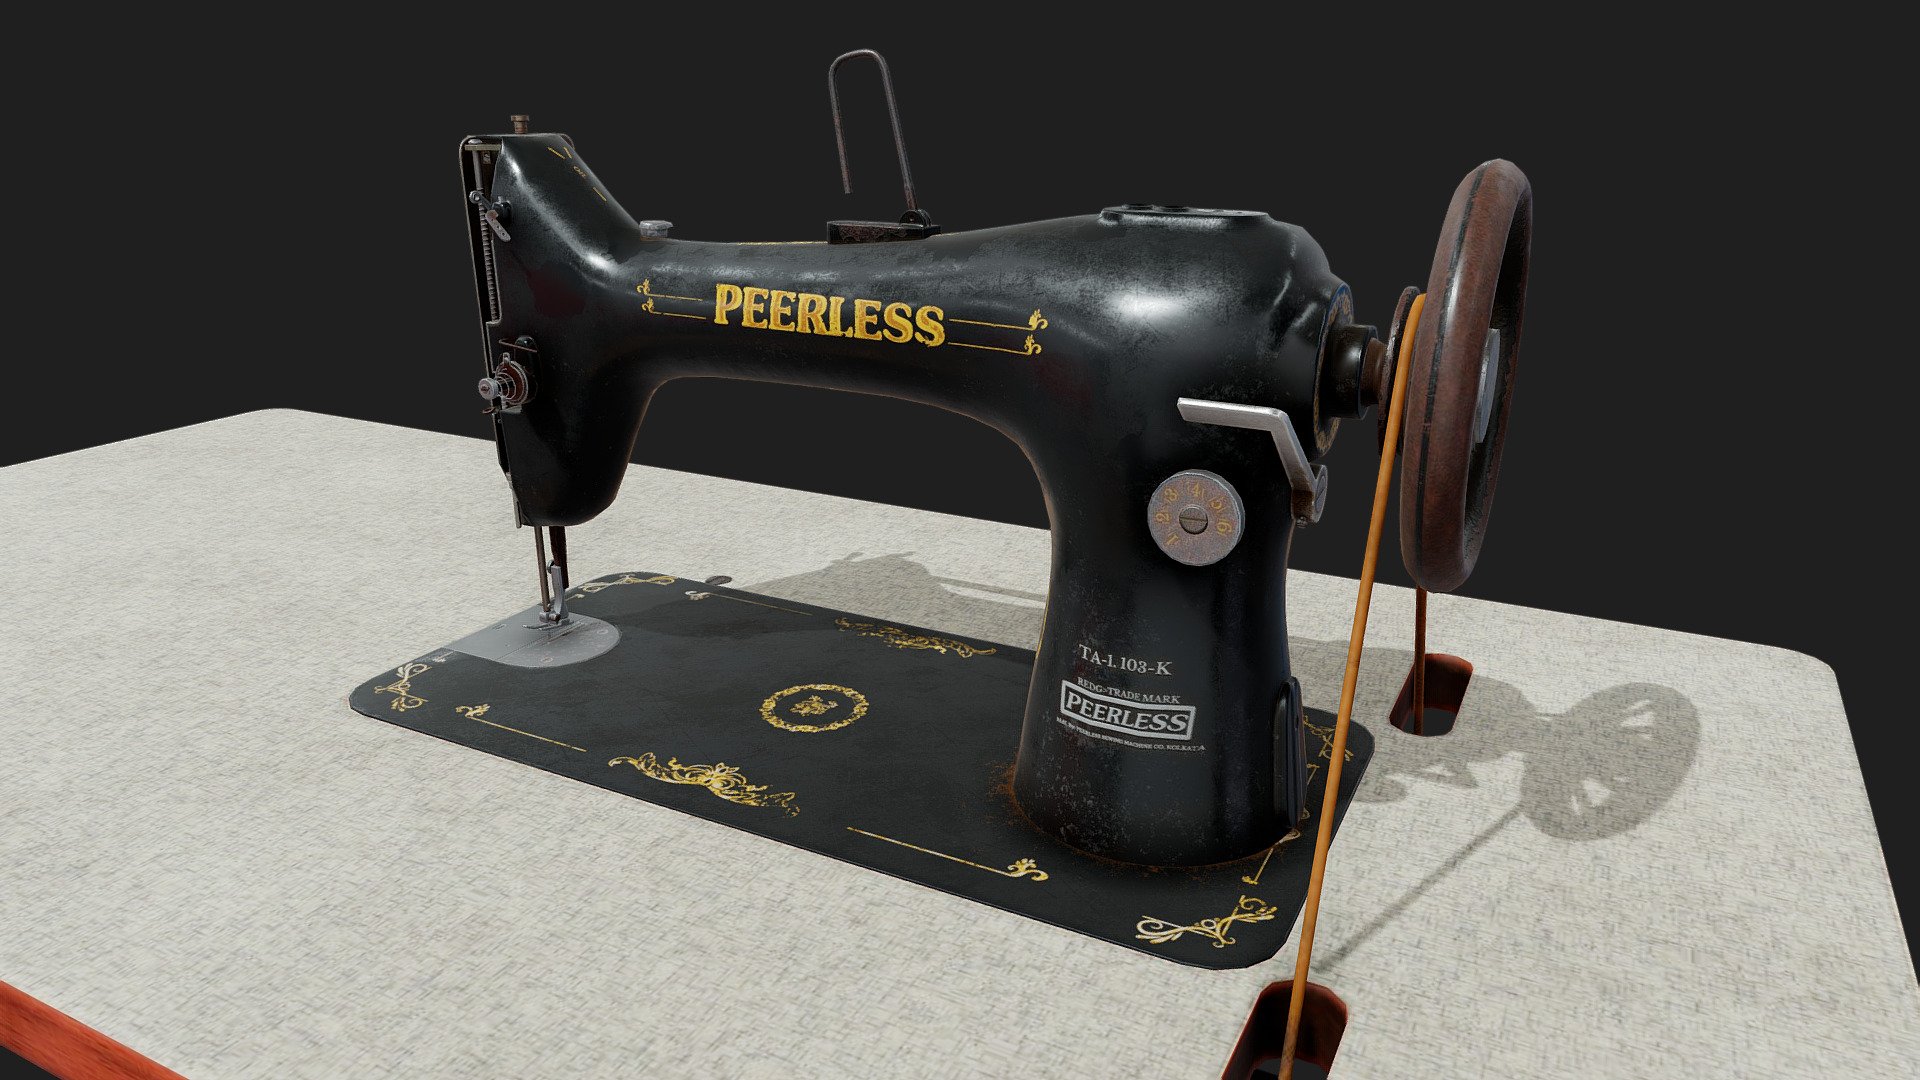 more renders at (https://www.artstation.com/artwork/nELXxe)
LOW POLY PBR ,GAME ASSETS - SEWING MACHINE FROM INDIA - Download Free 3D model by ASHISH (@3dmodelsmith) 3d model